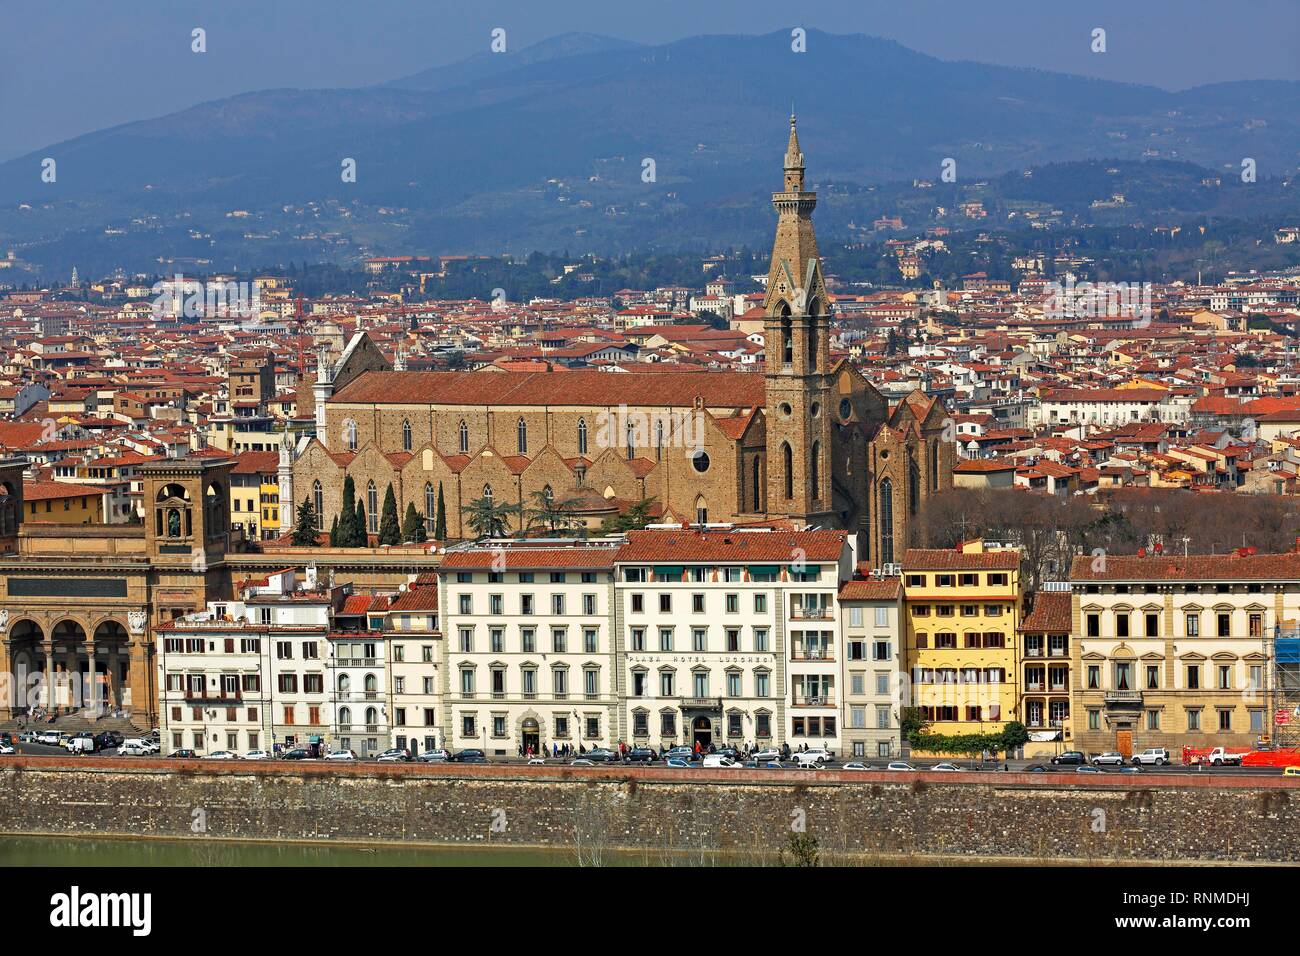 Cityscape with Basilica Santa Croce in the Old Town, Florence, Tuscany, Italy Stock Photo